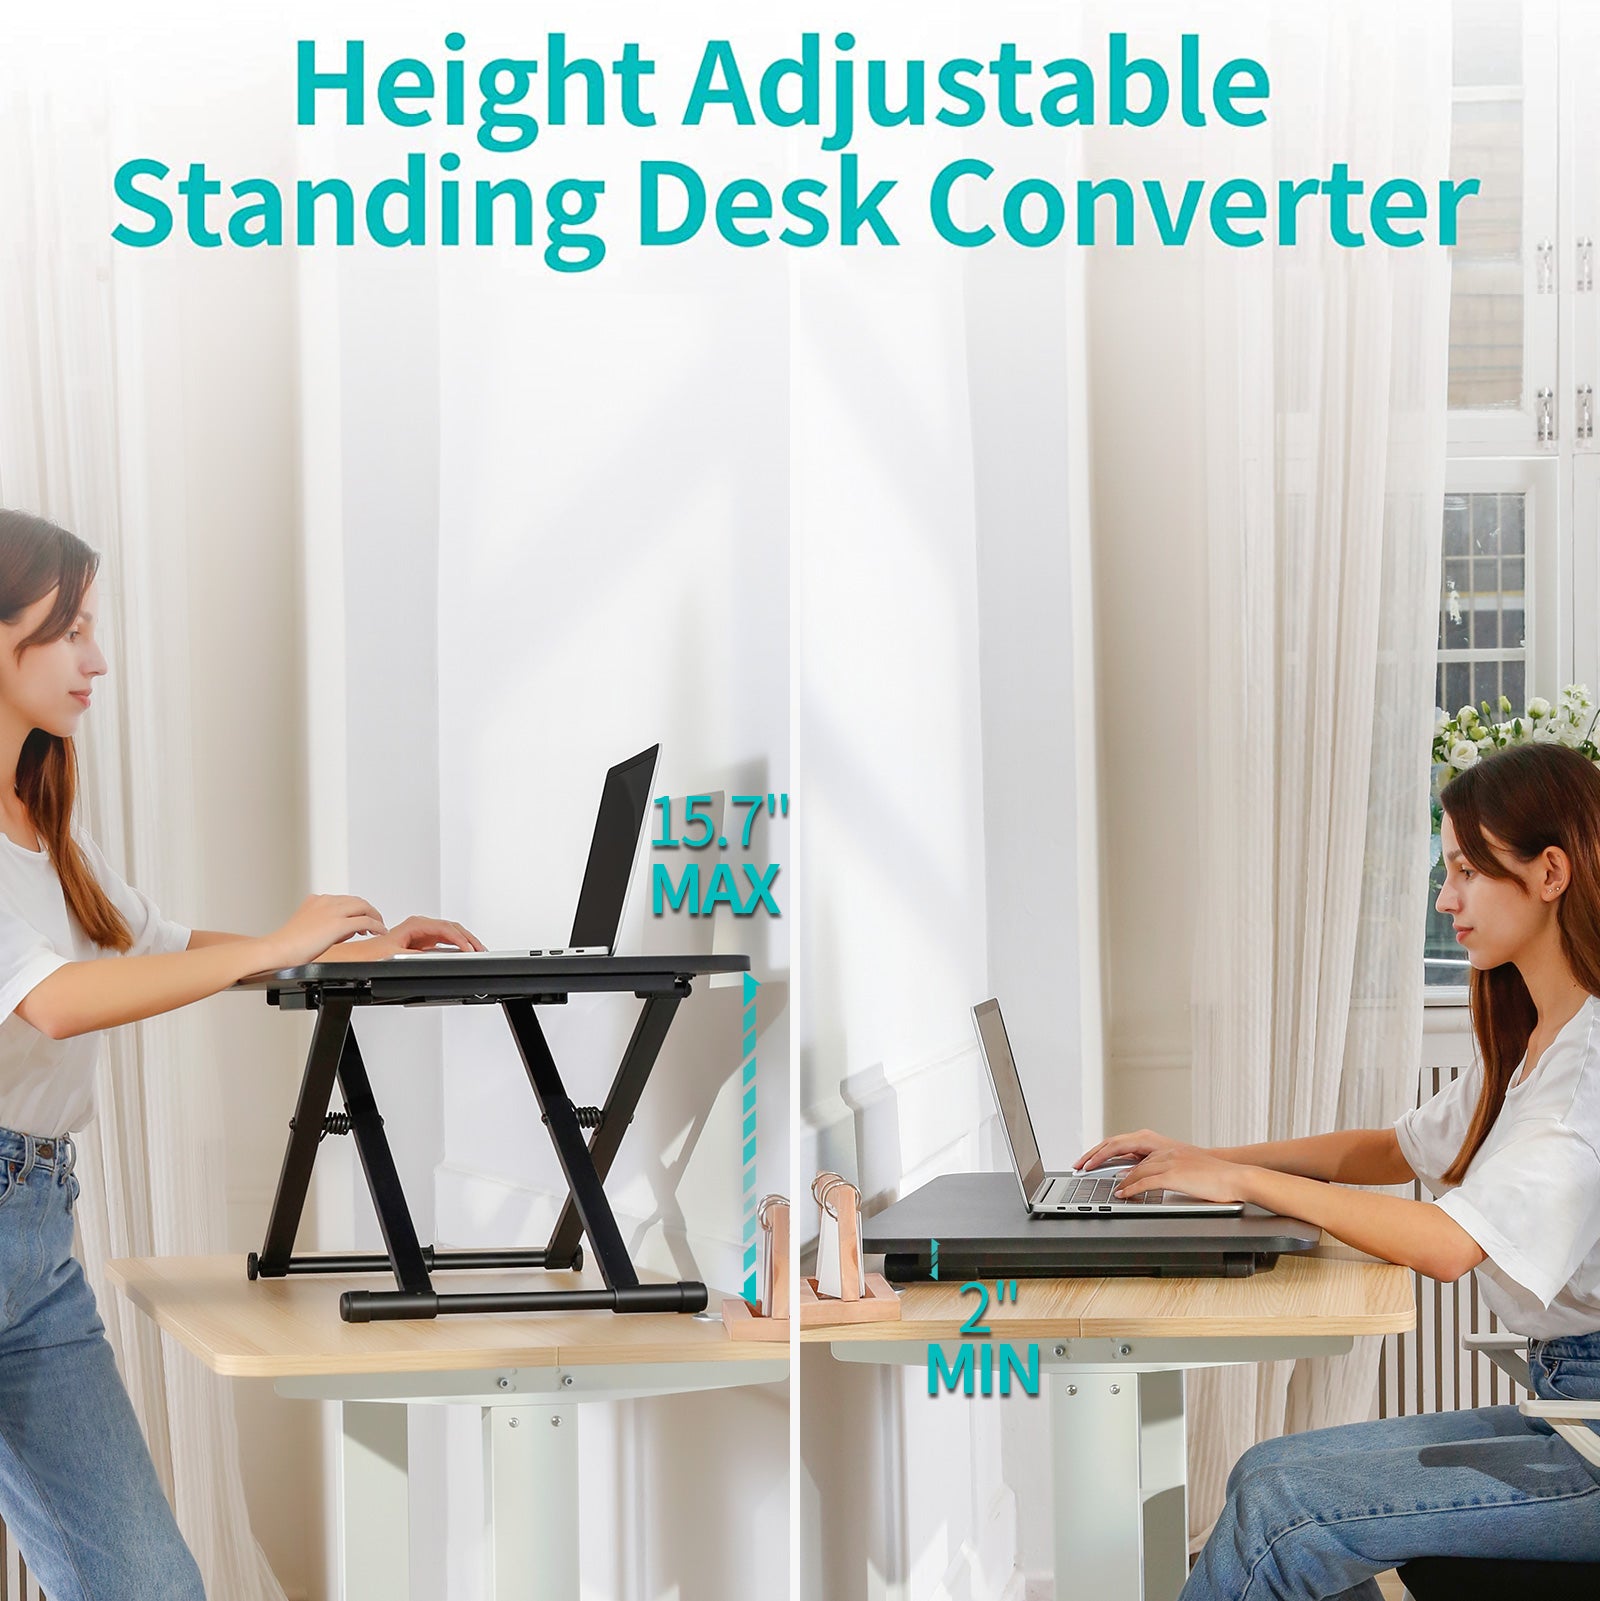 height adjustable standing desk converter from 2'' to 15.7''